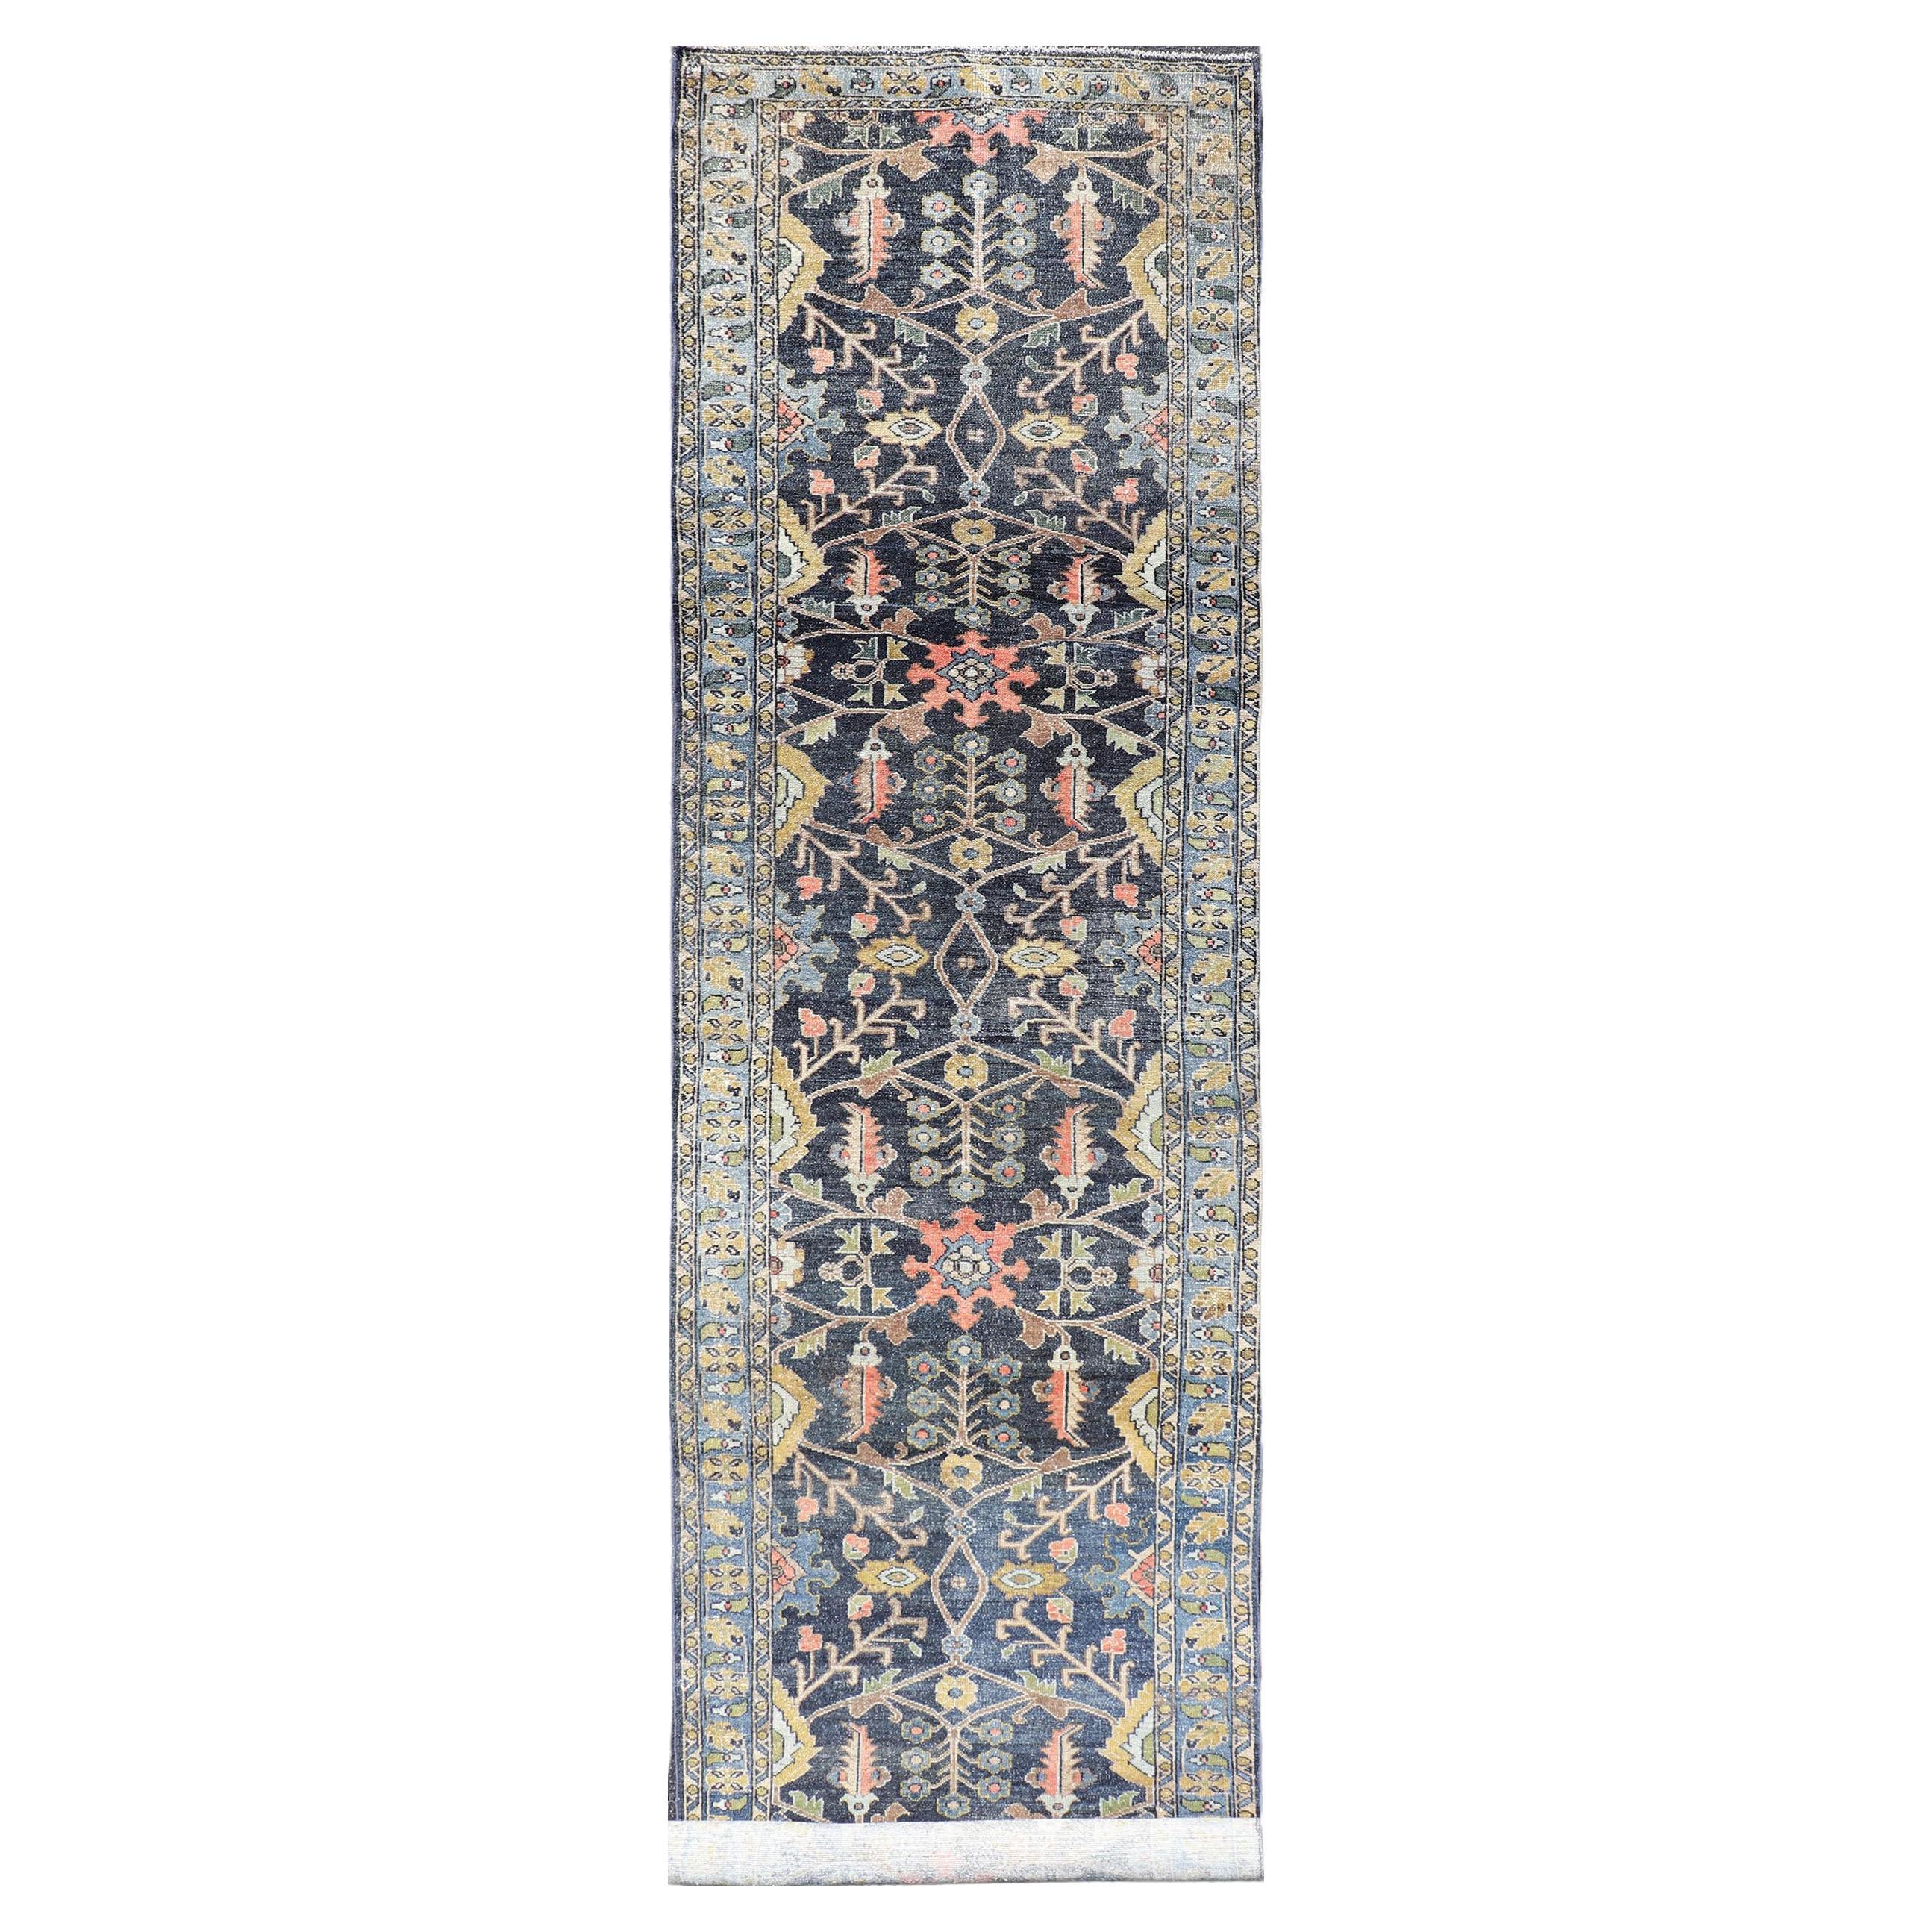 Antique Persian Malayer Tribal Runner in Steal Gray Blue, Green, Gold & Coral 